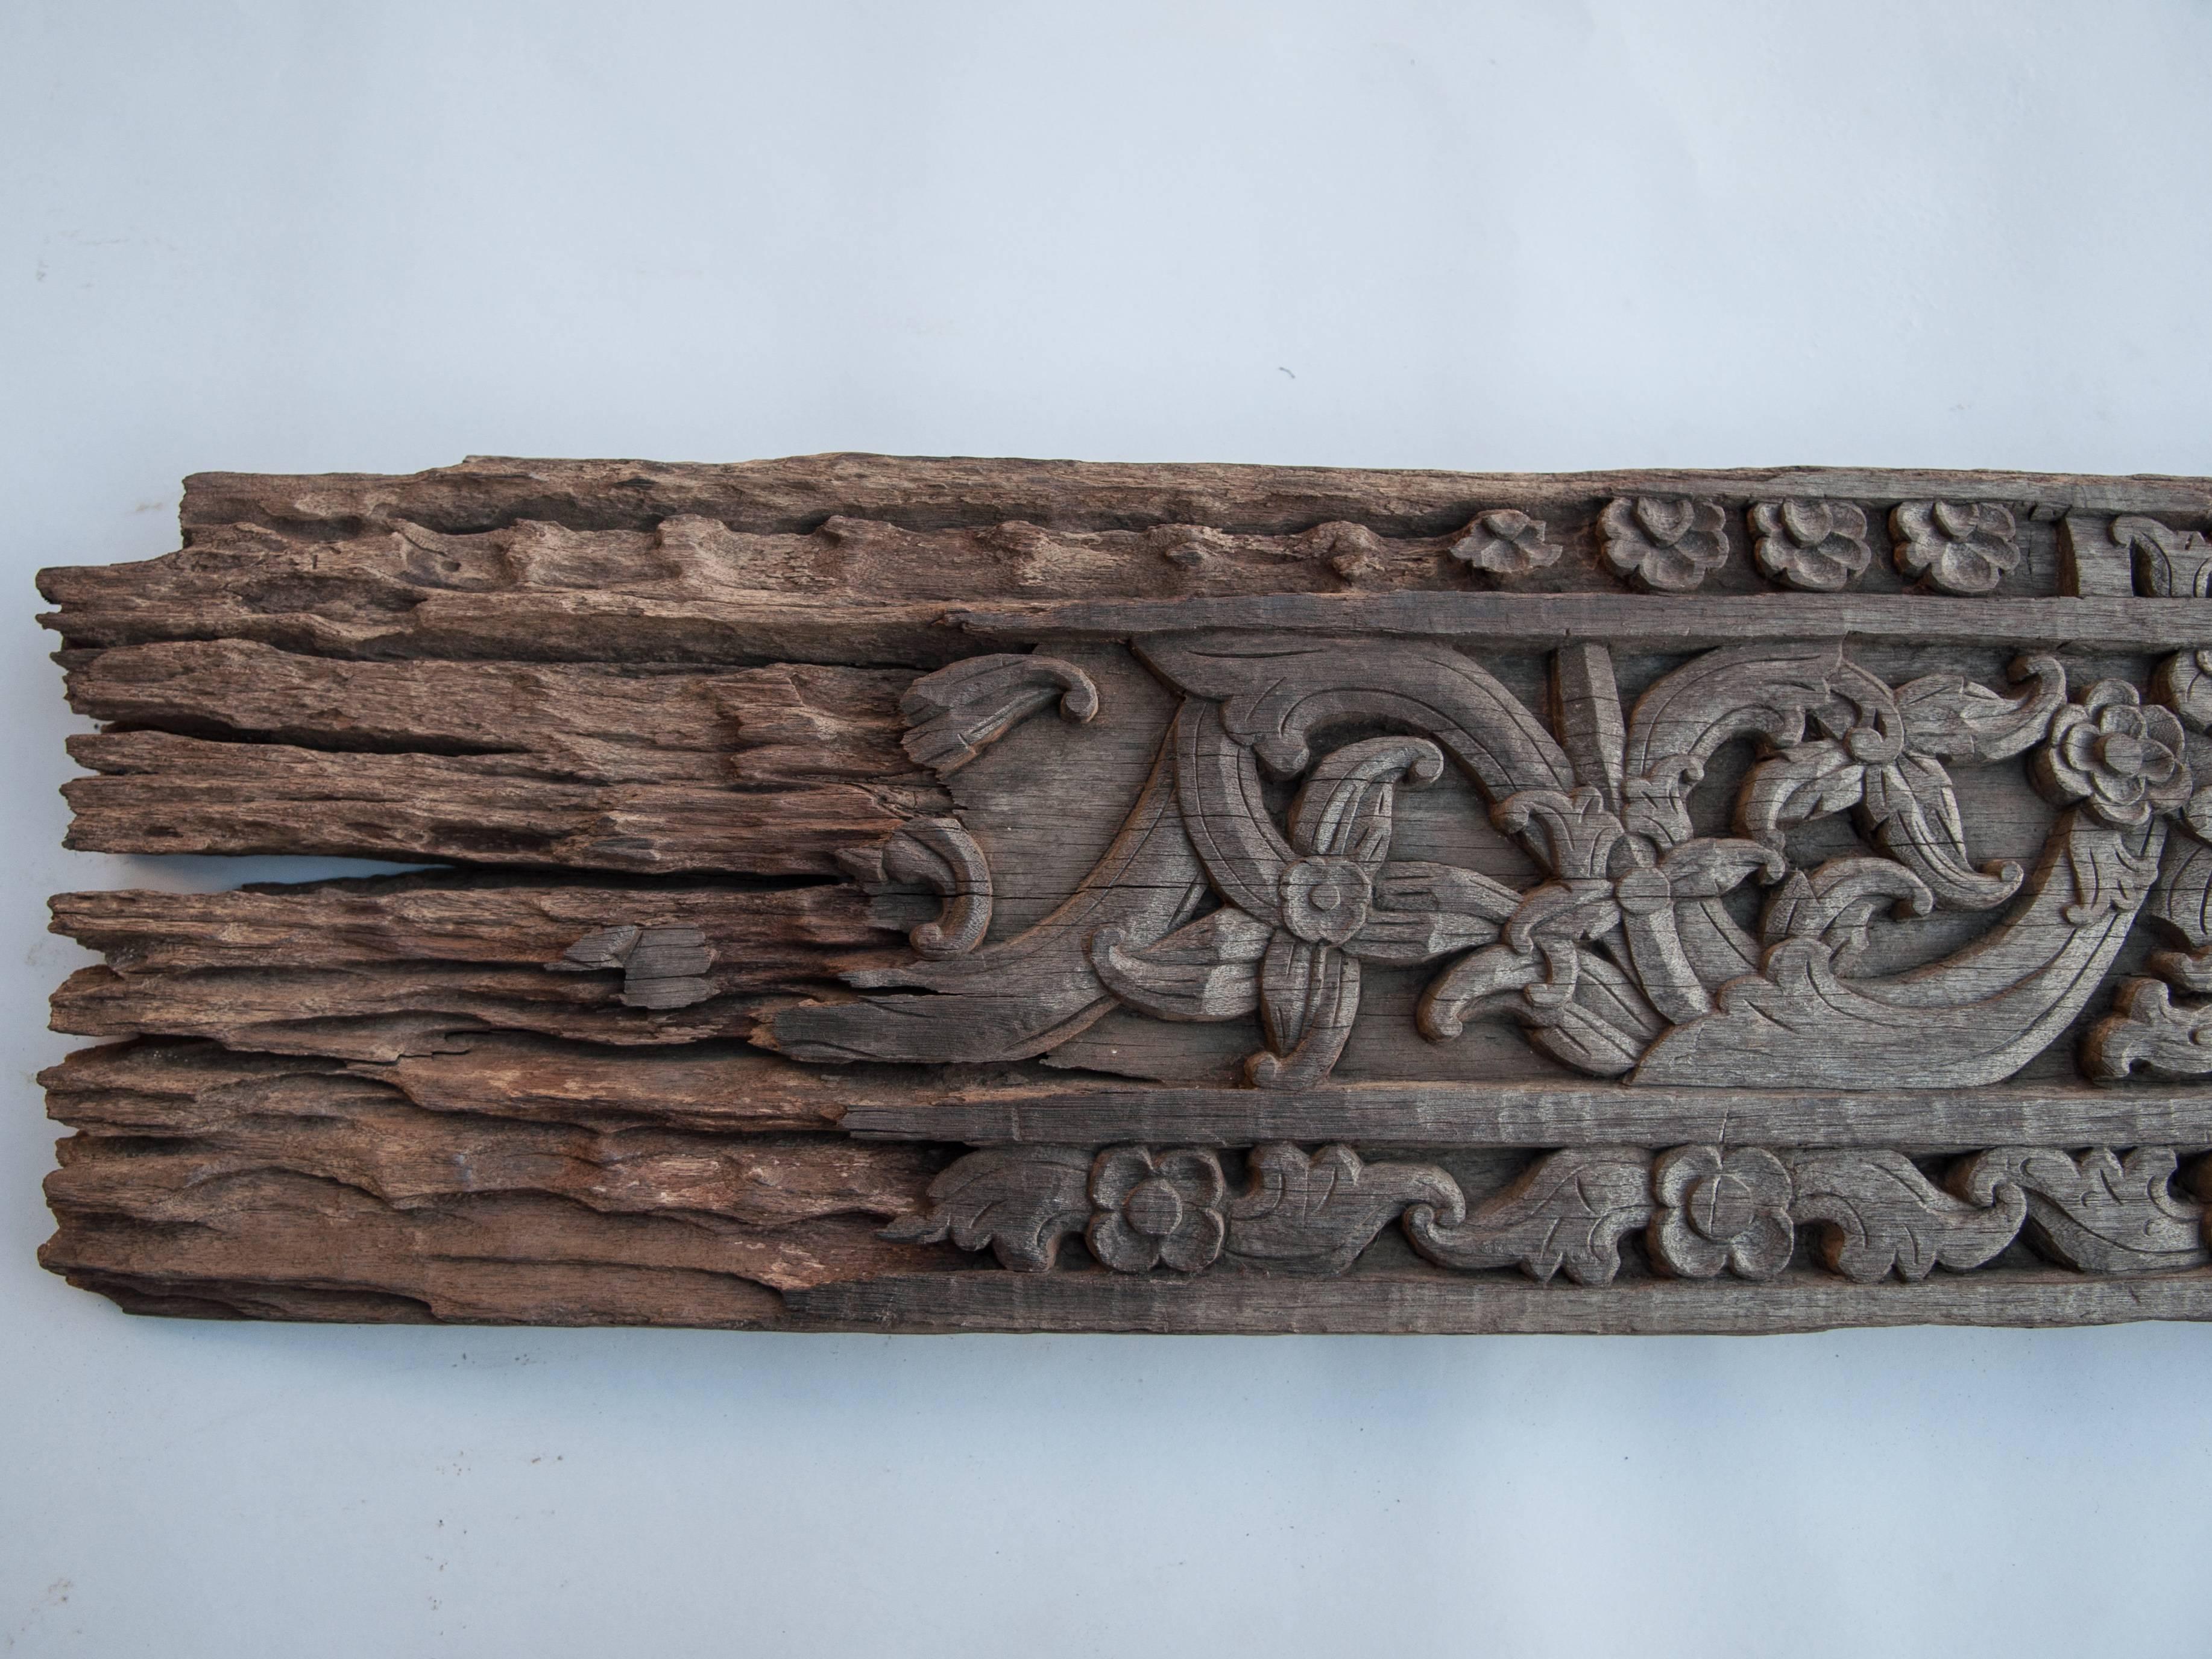 Carved ironwood panel with floral motif. Borneo, mid-20th century.
This beautifully eroded decorative panel incorporates a floral motif and comes from a Dayak longhouse in Borneo.
Dimensions: 55 inches long by 10.75 inches tall by 2 inches thick.